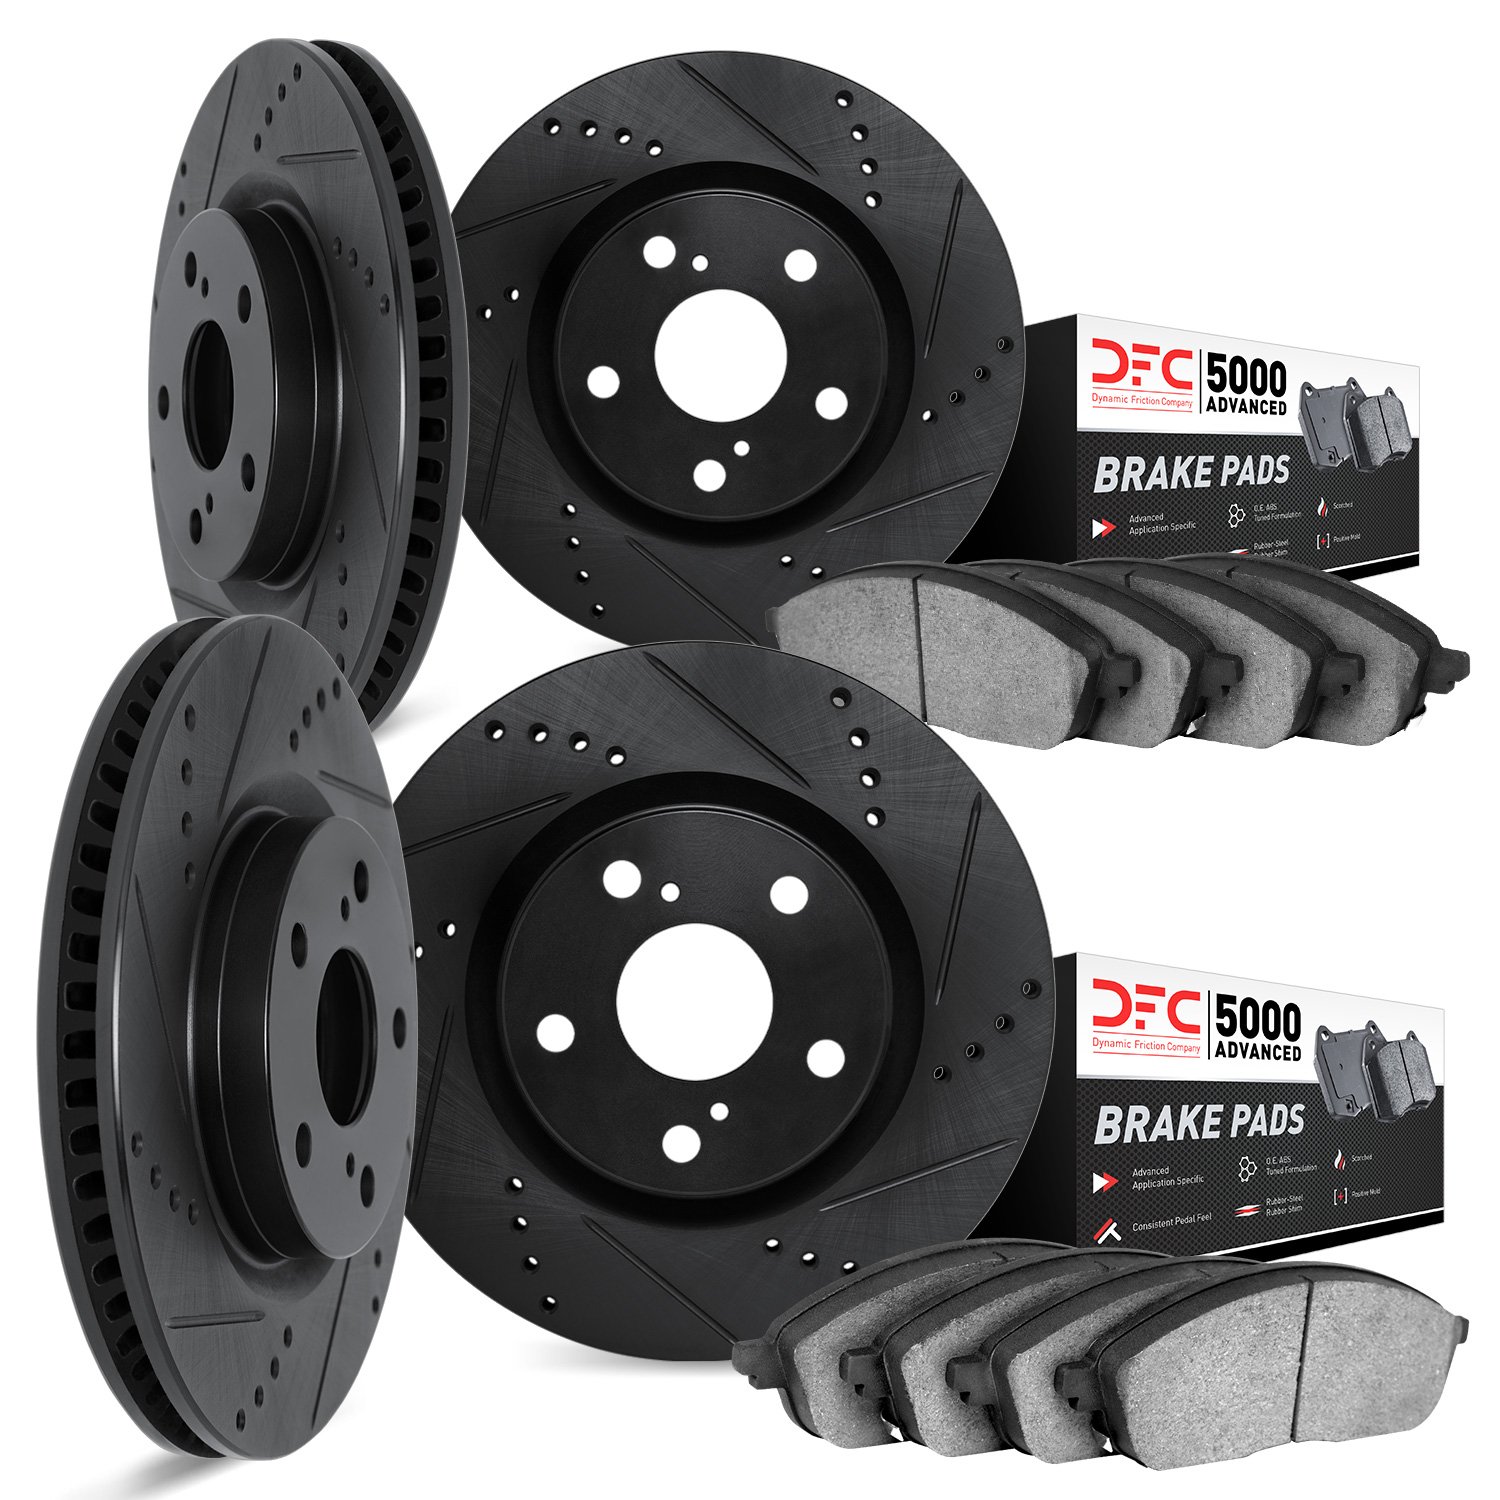 8504-31060 Drilled/Slotted Brake Rotors w/5000 Advanced Brake Pads Kit [Black], Fits Select Multiple Makes/Models, Position: Fro